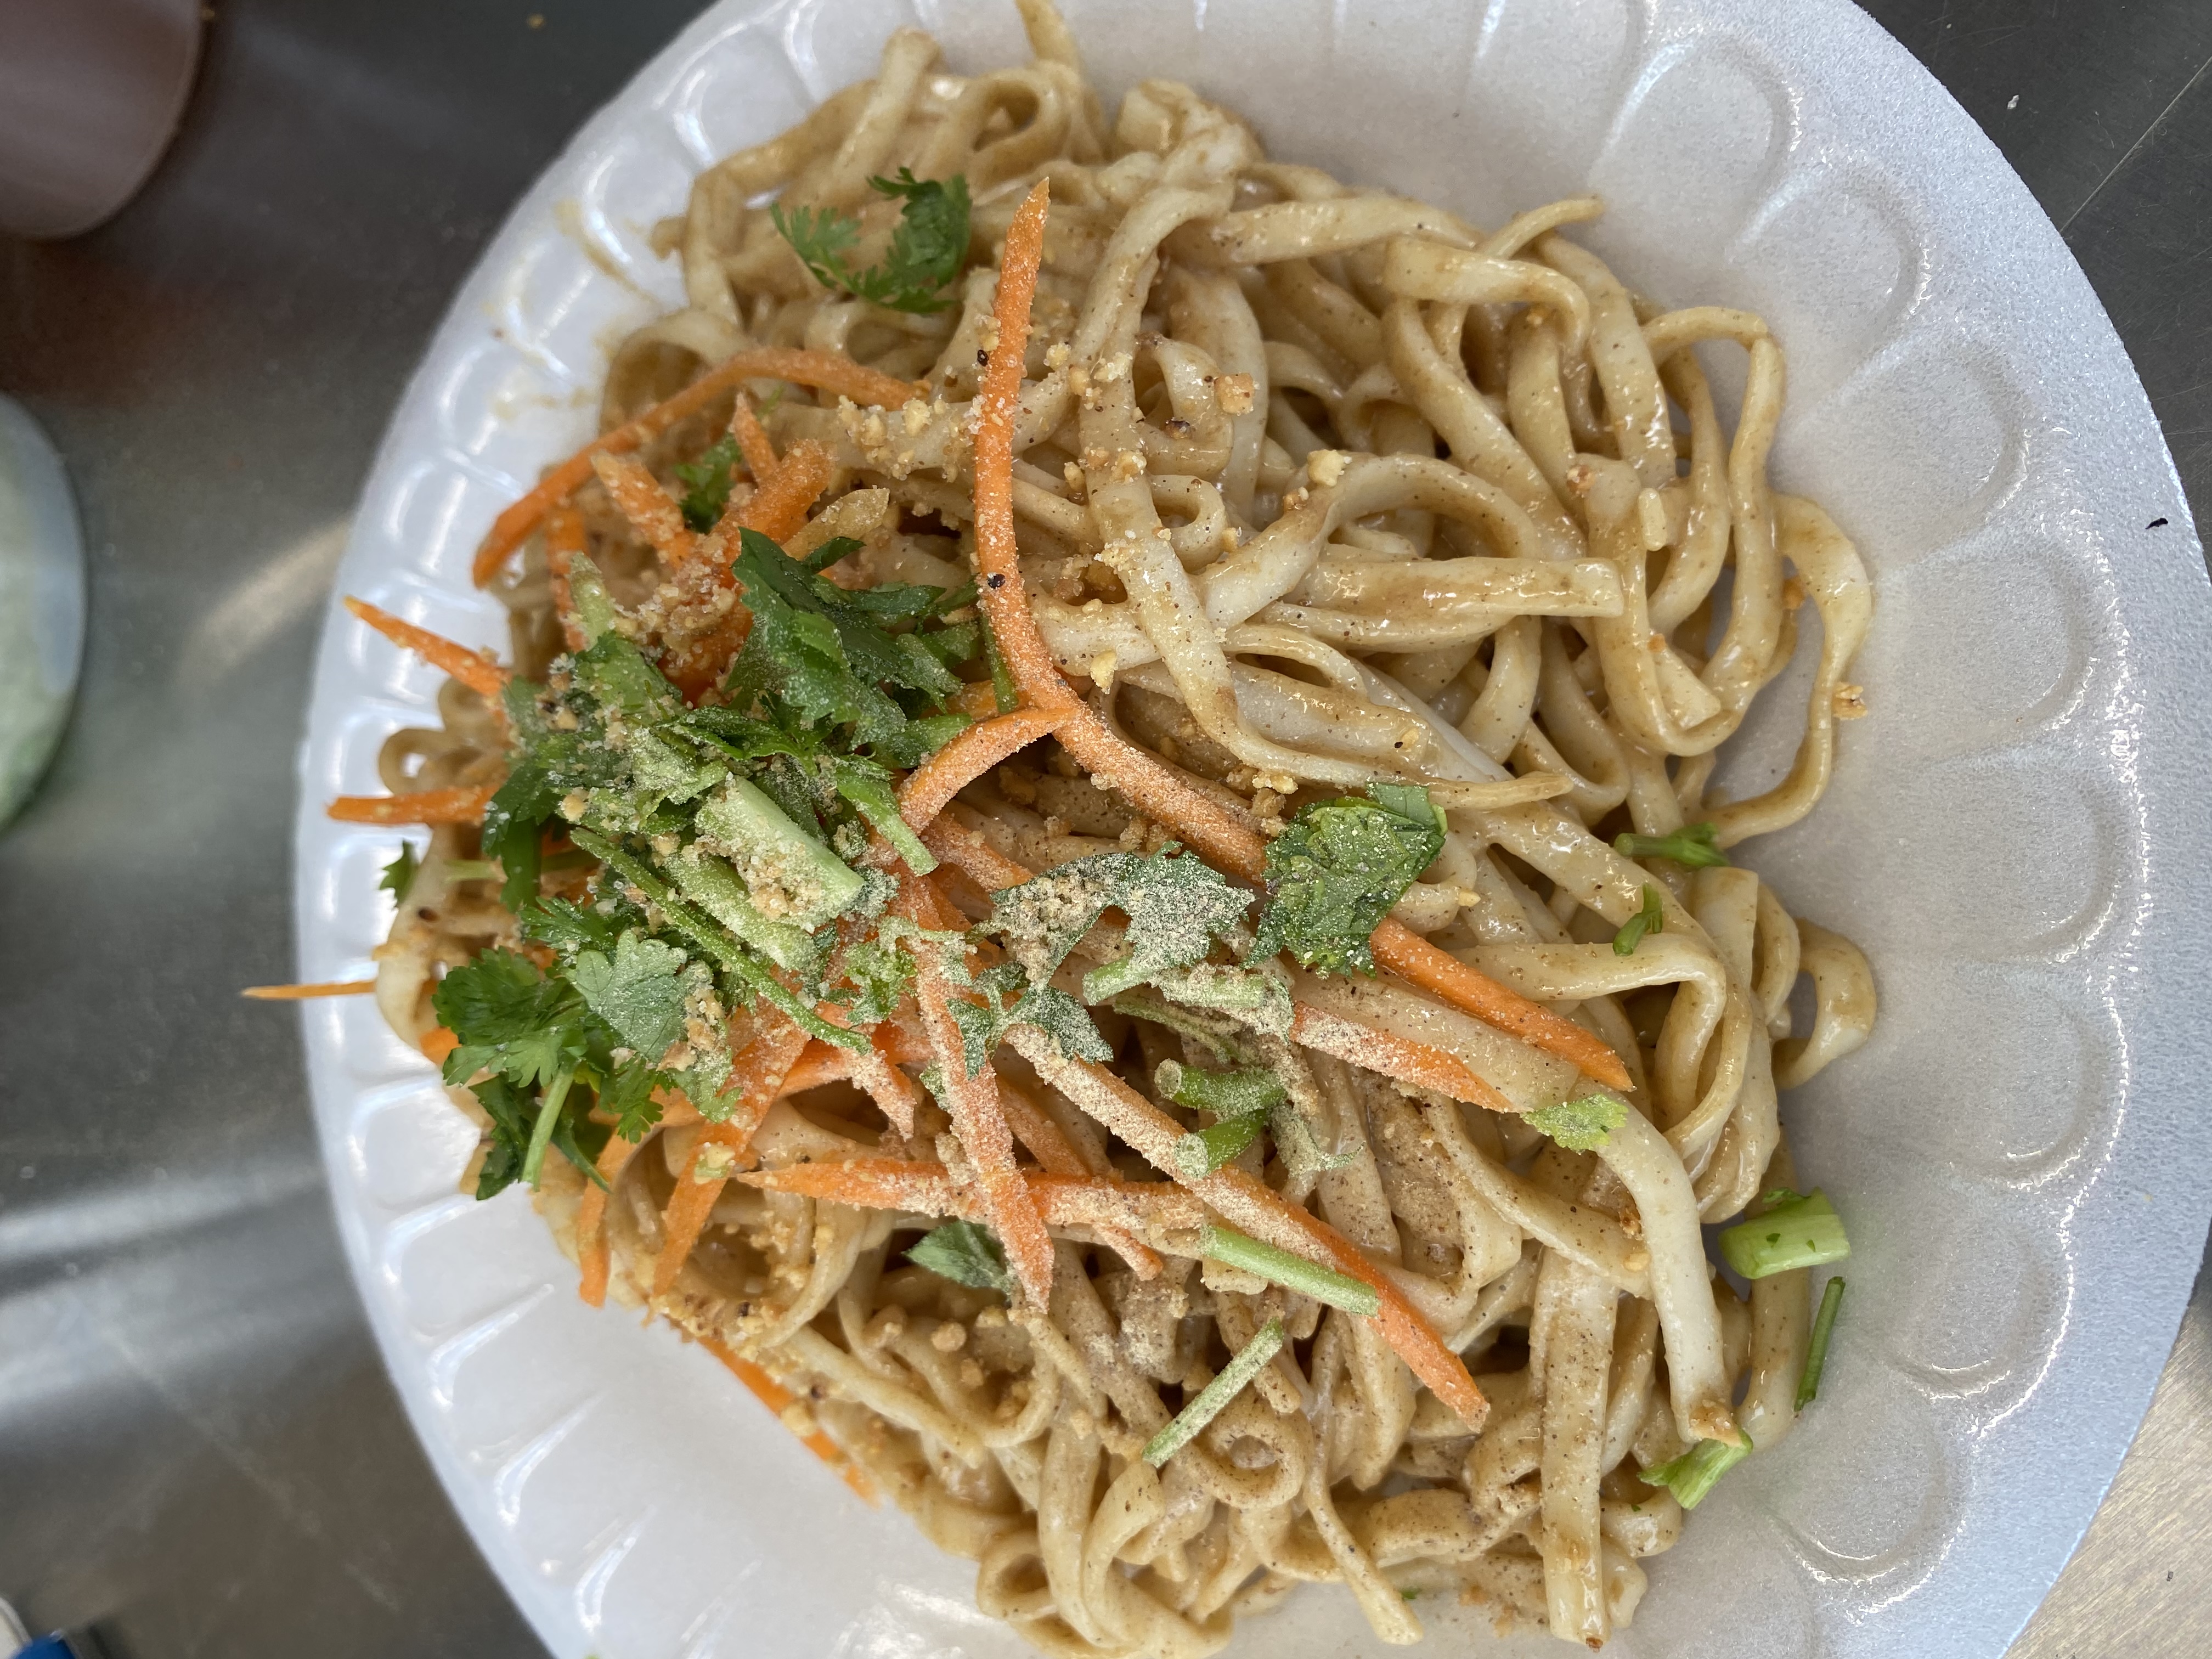 Taiwanese style noodle with Peanut/Sesame Sauce